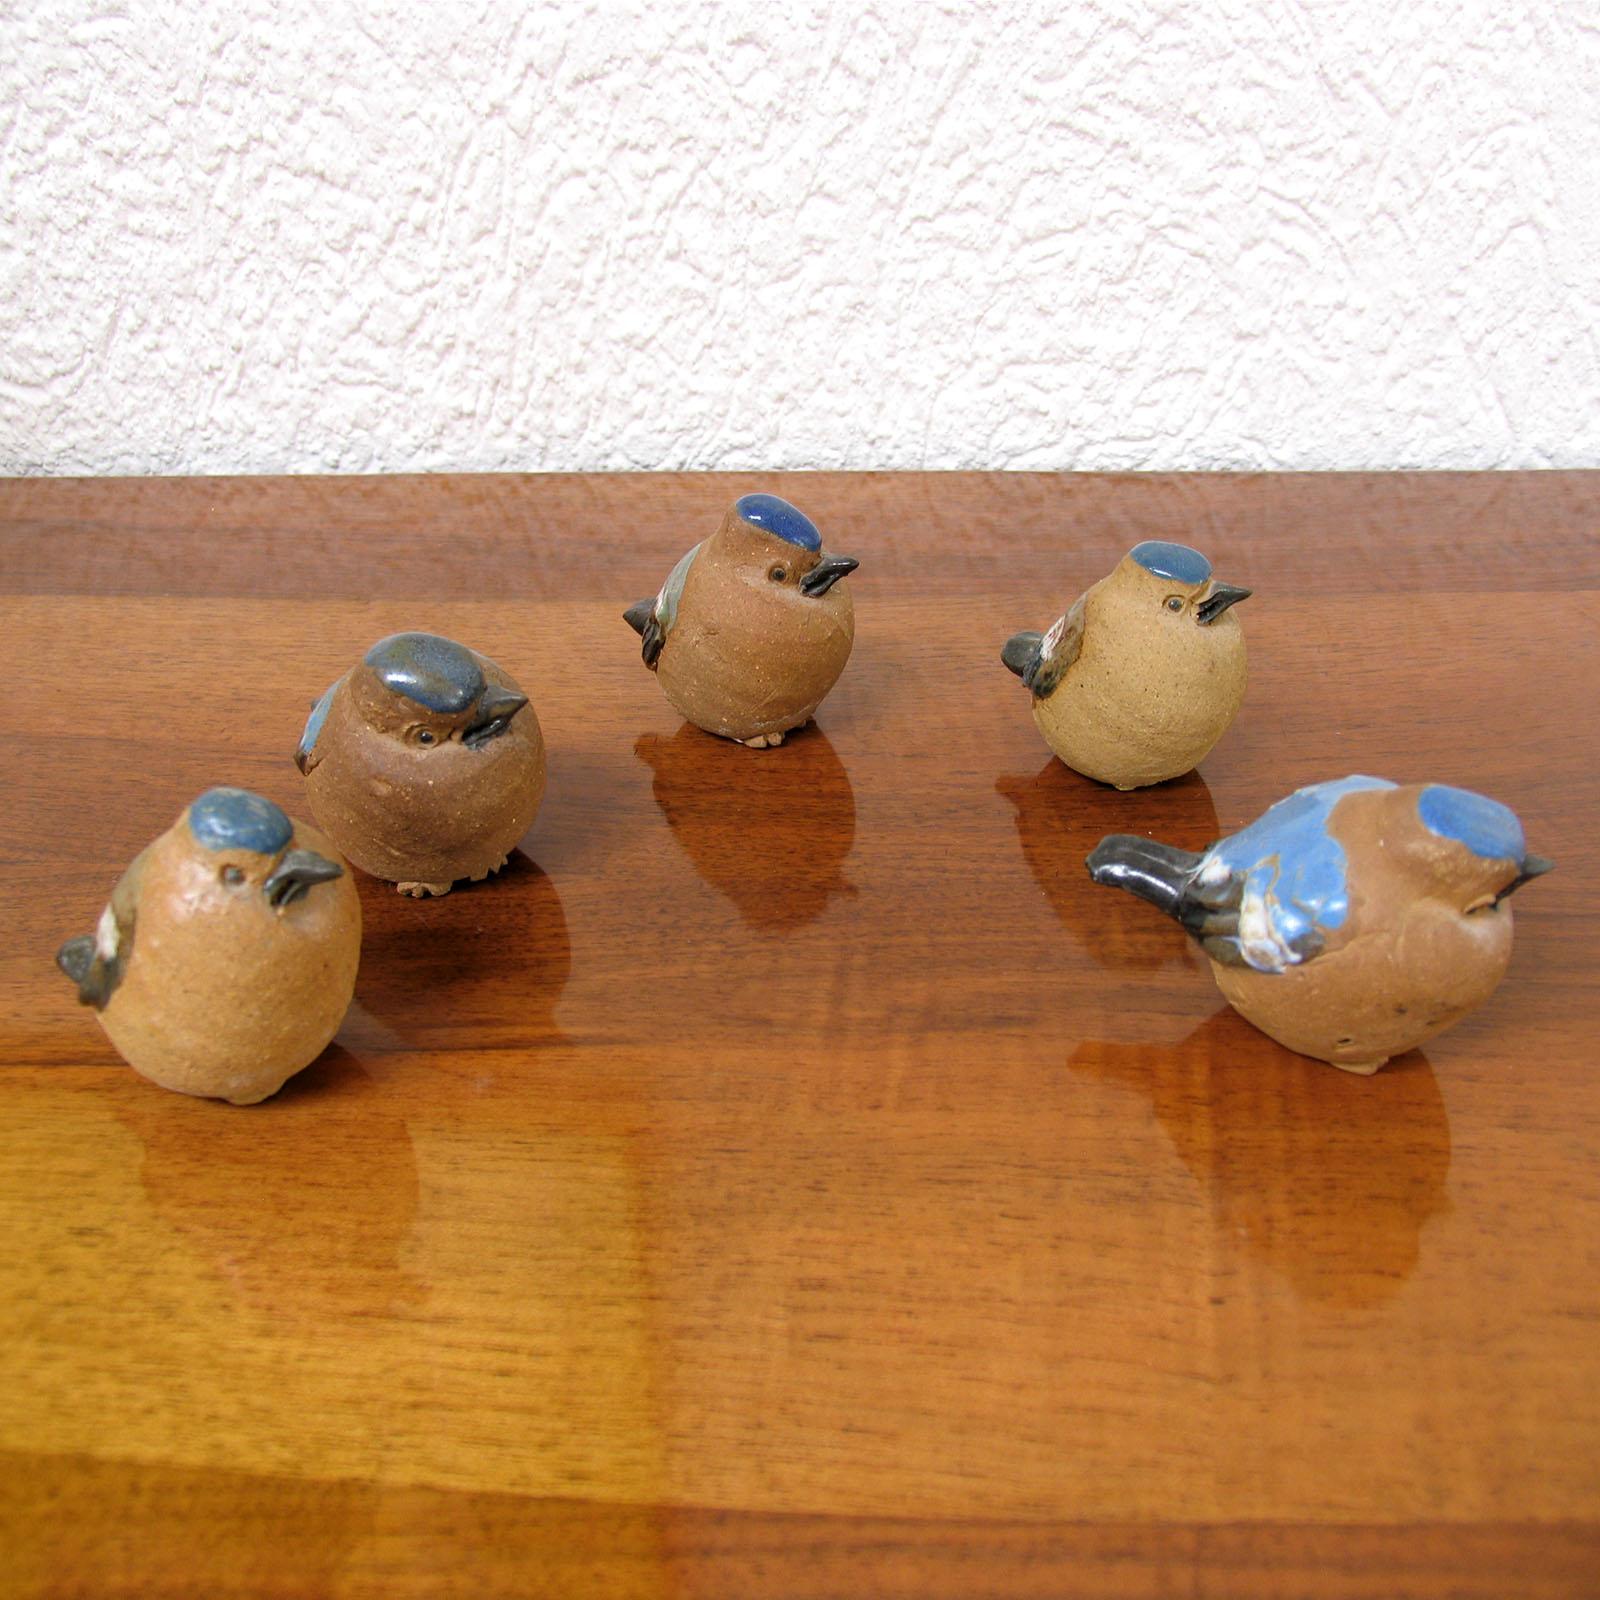 Mid-Century Modern Scandinavian ceramic birds figurines, Sweden, 1960s.
Set of five joyful birds, sparrows, made of stoneware, in natural color, partly glazed in beautiful shades of blue. Artist's monogram impressed under the bottom. In excellent